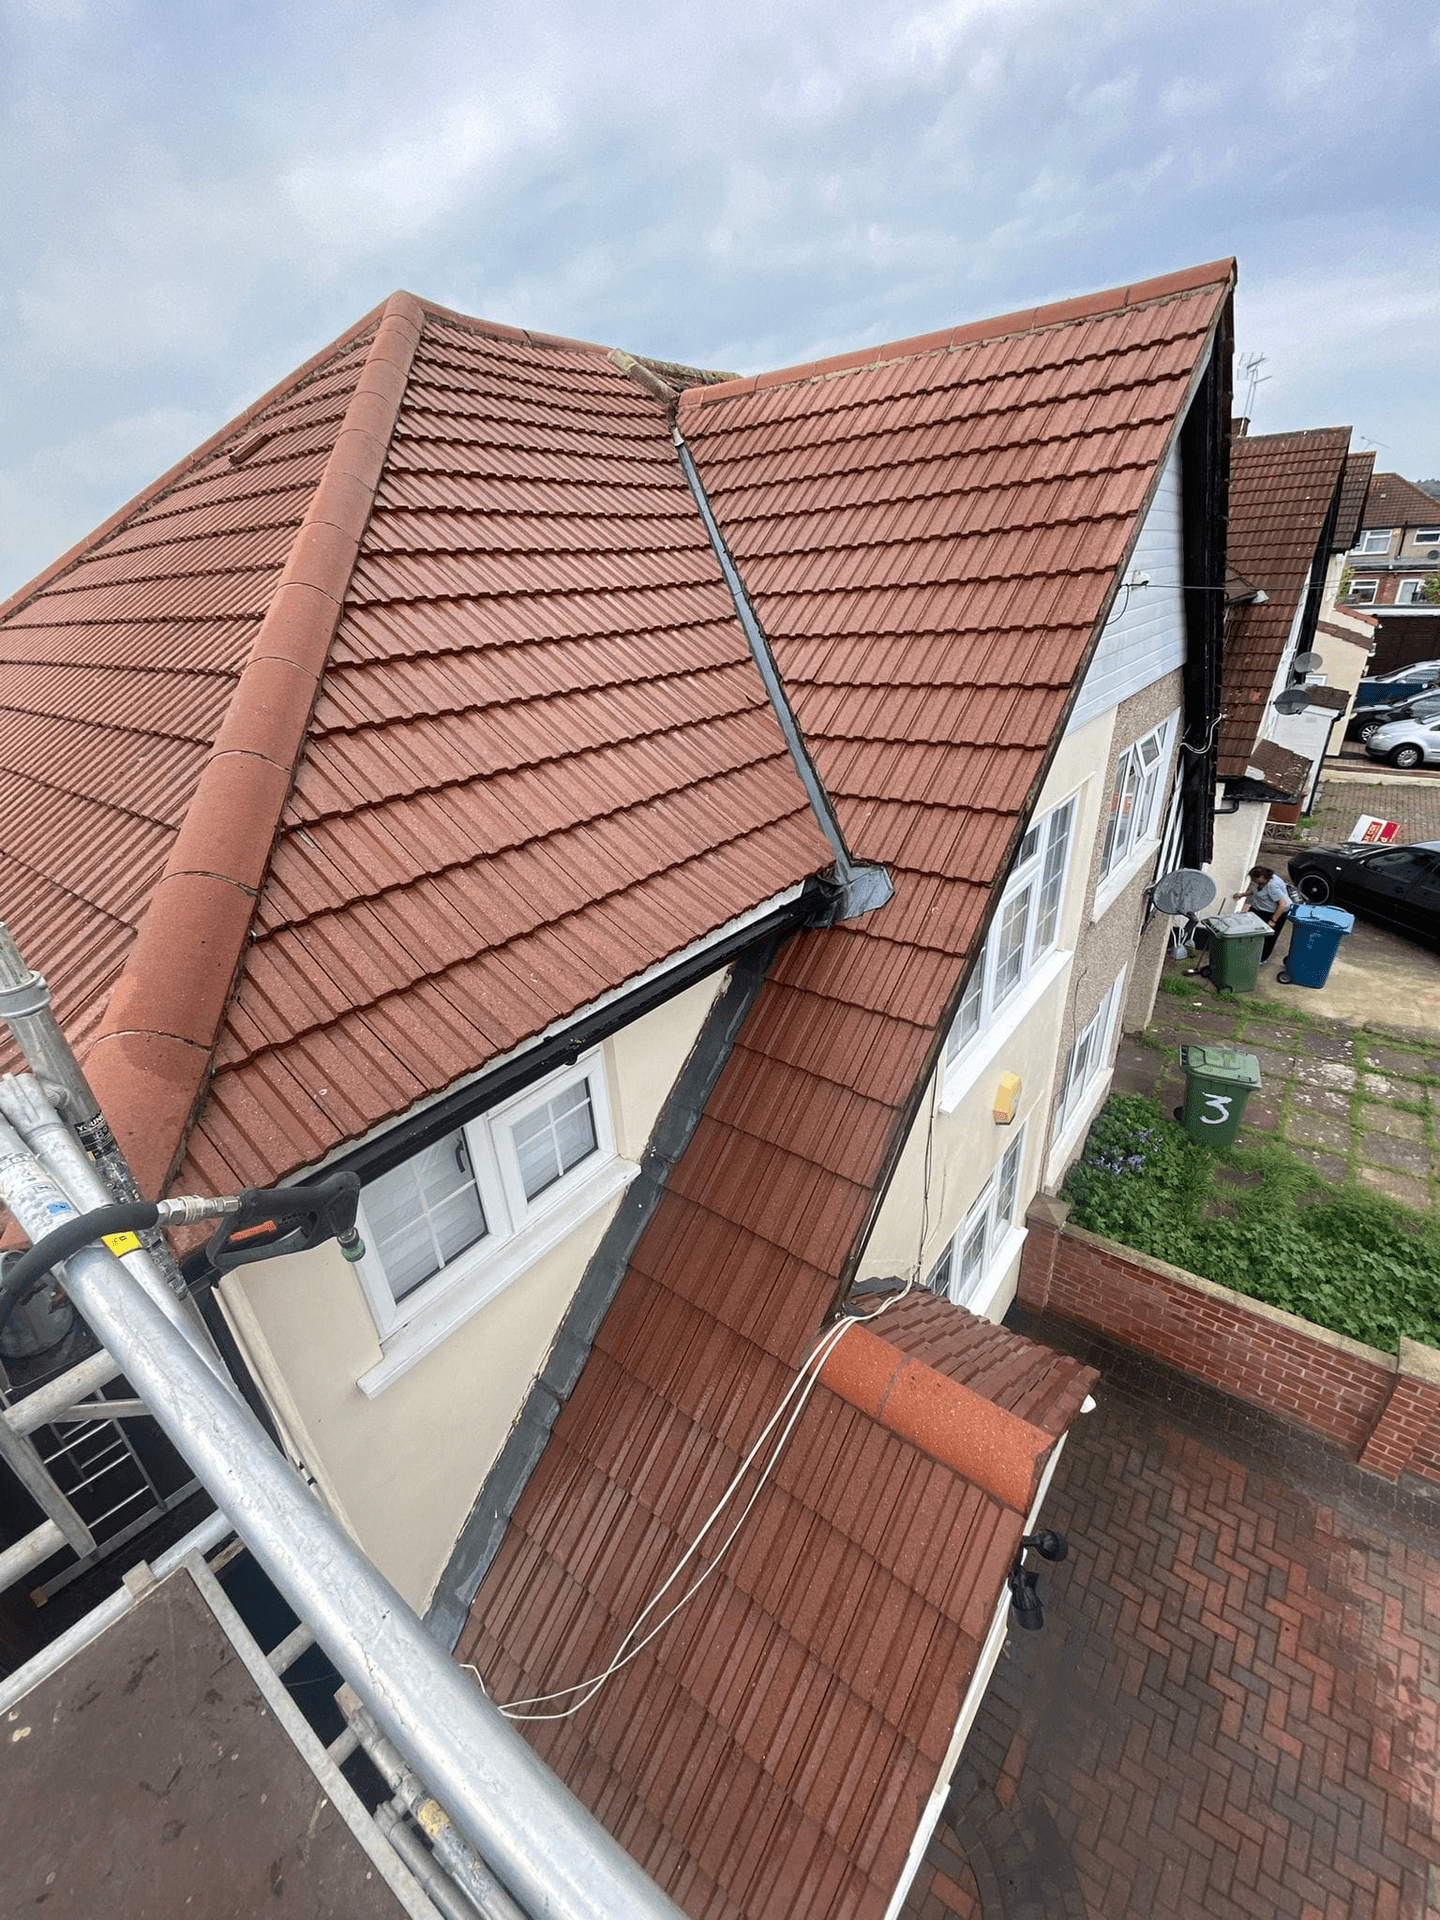 High roof after prestige bin cleaning clean